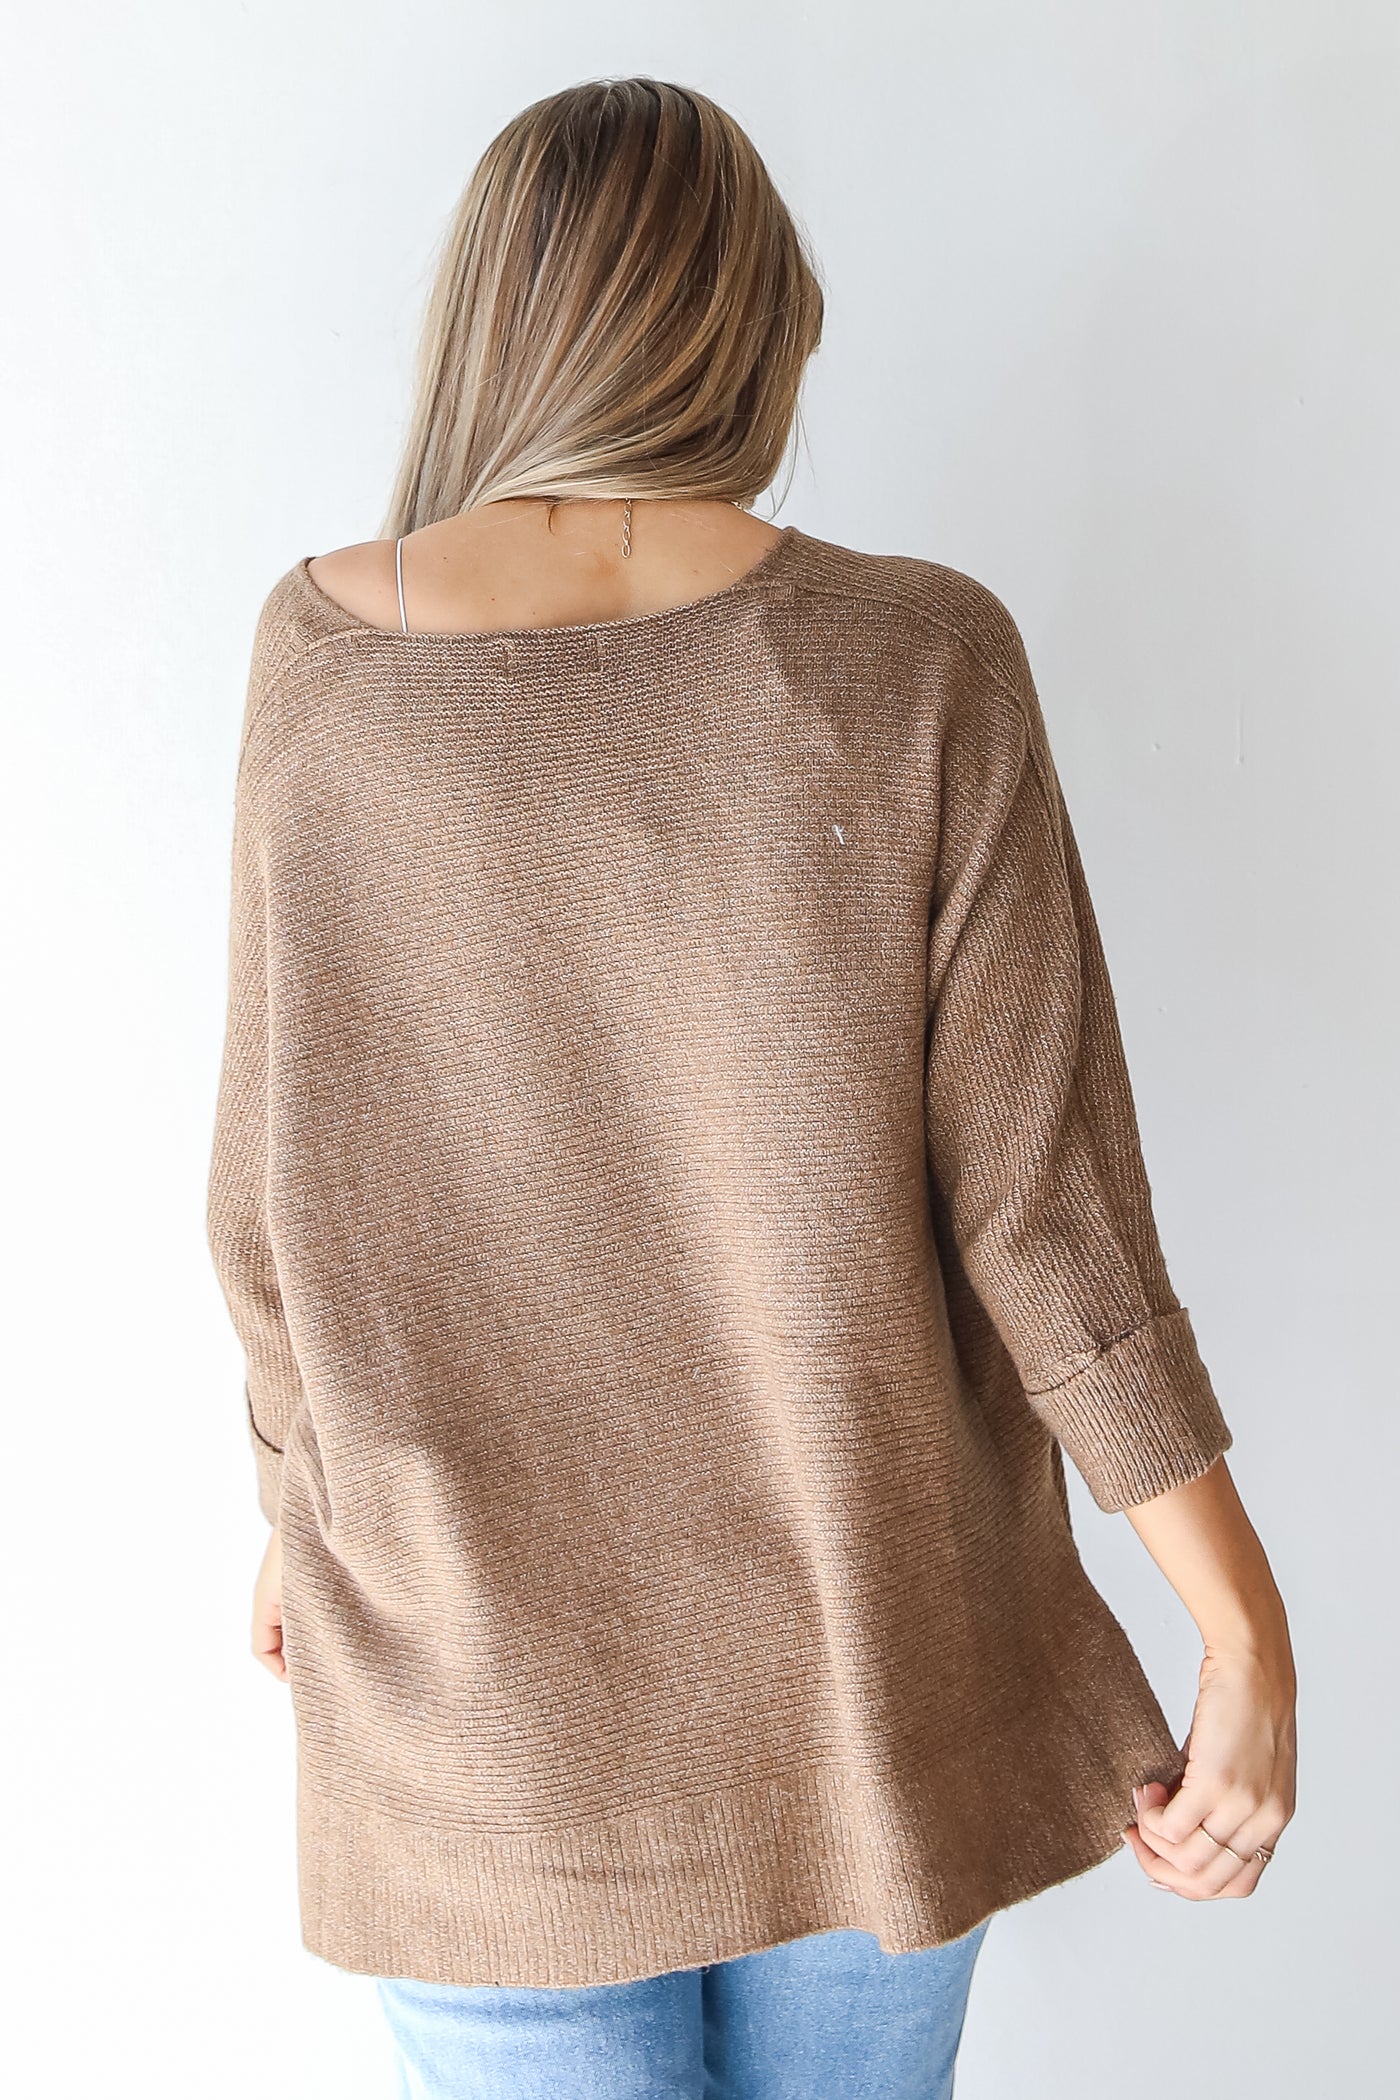 Oversized Sweater in camel back view